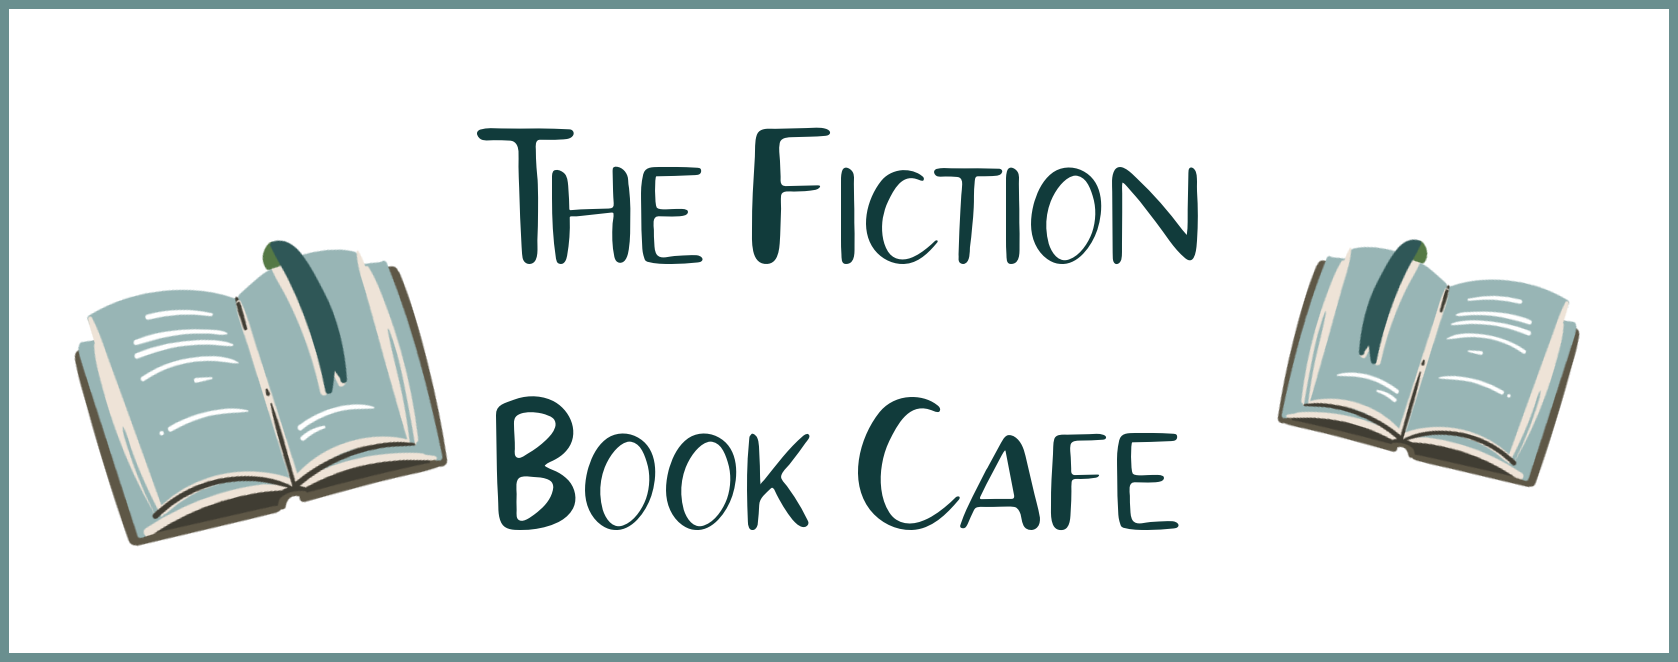 The Fiction Book Cafe